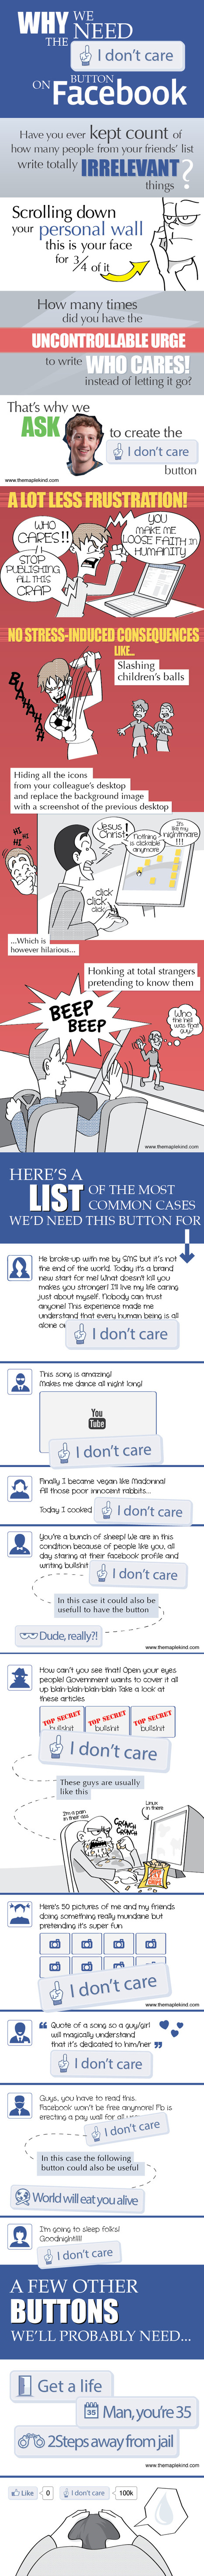 9 Reasons Why Facebook Needs the "I Don't Care" Button - Infographic | Jeffbullas's Blog | SocialMedia_me | Scoop.it